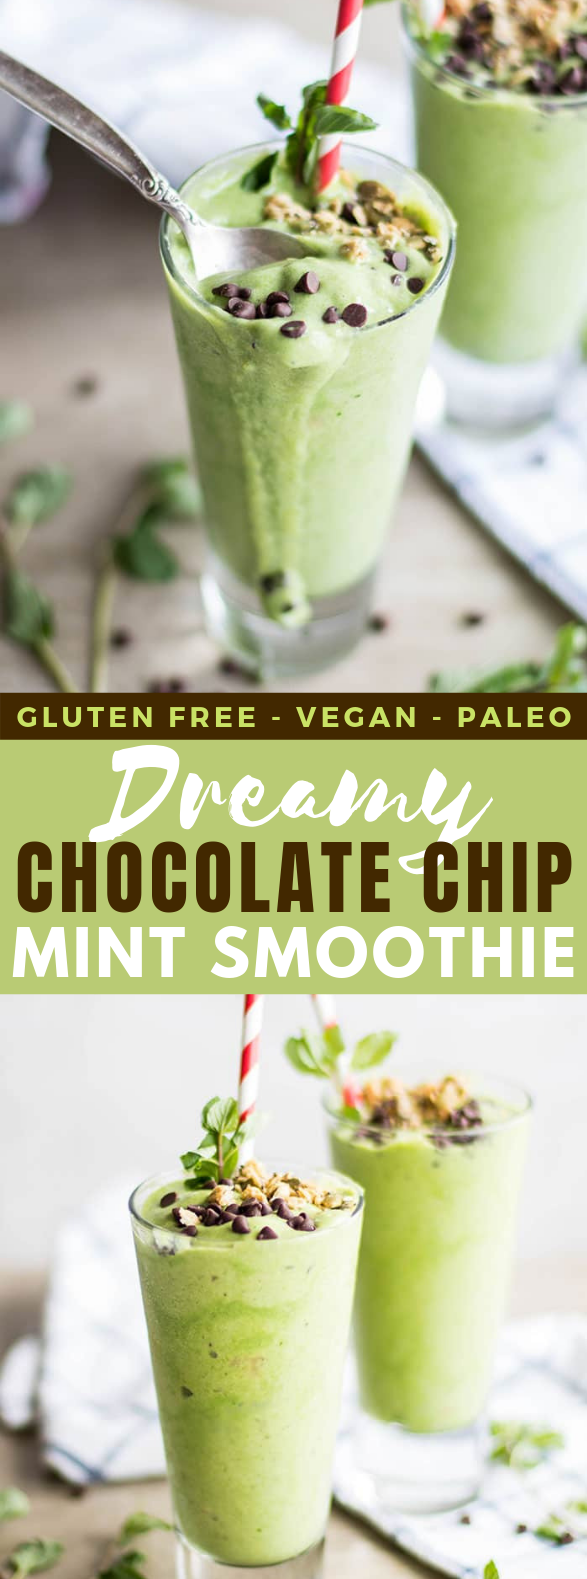 Dreamy Chocolate Chip Mint Smoothie #drinks #healthy